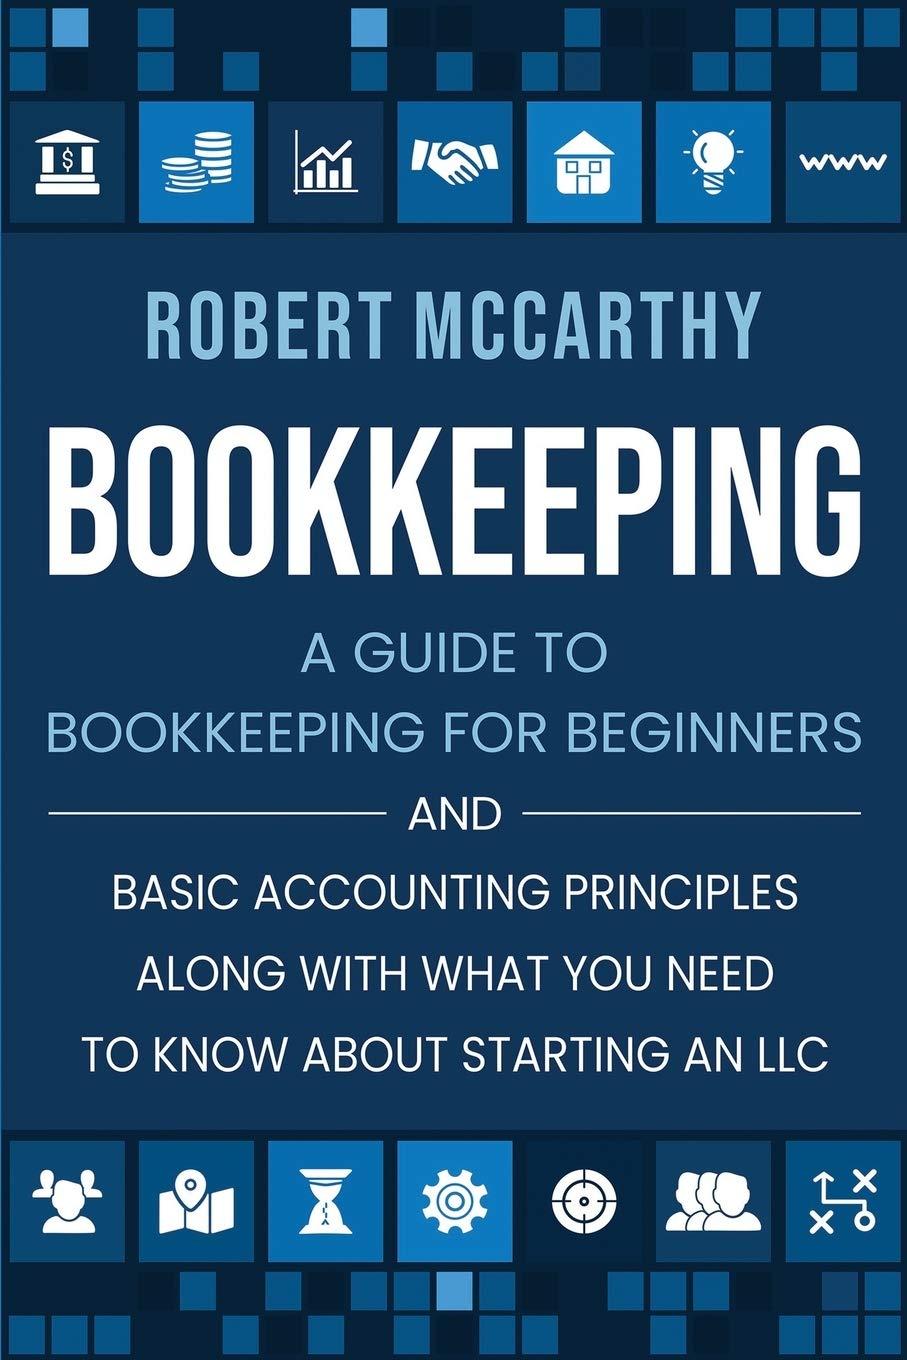 bookkeeping a guide to bookkeeping for beginners and basic accounting principles along with what you need to